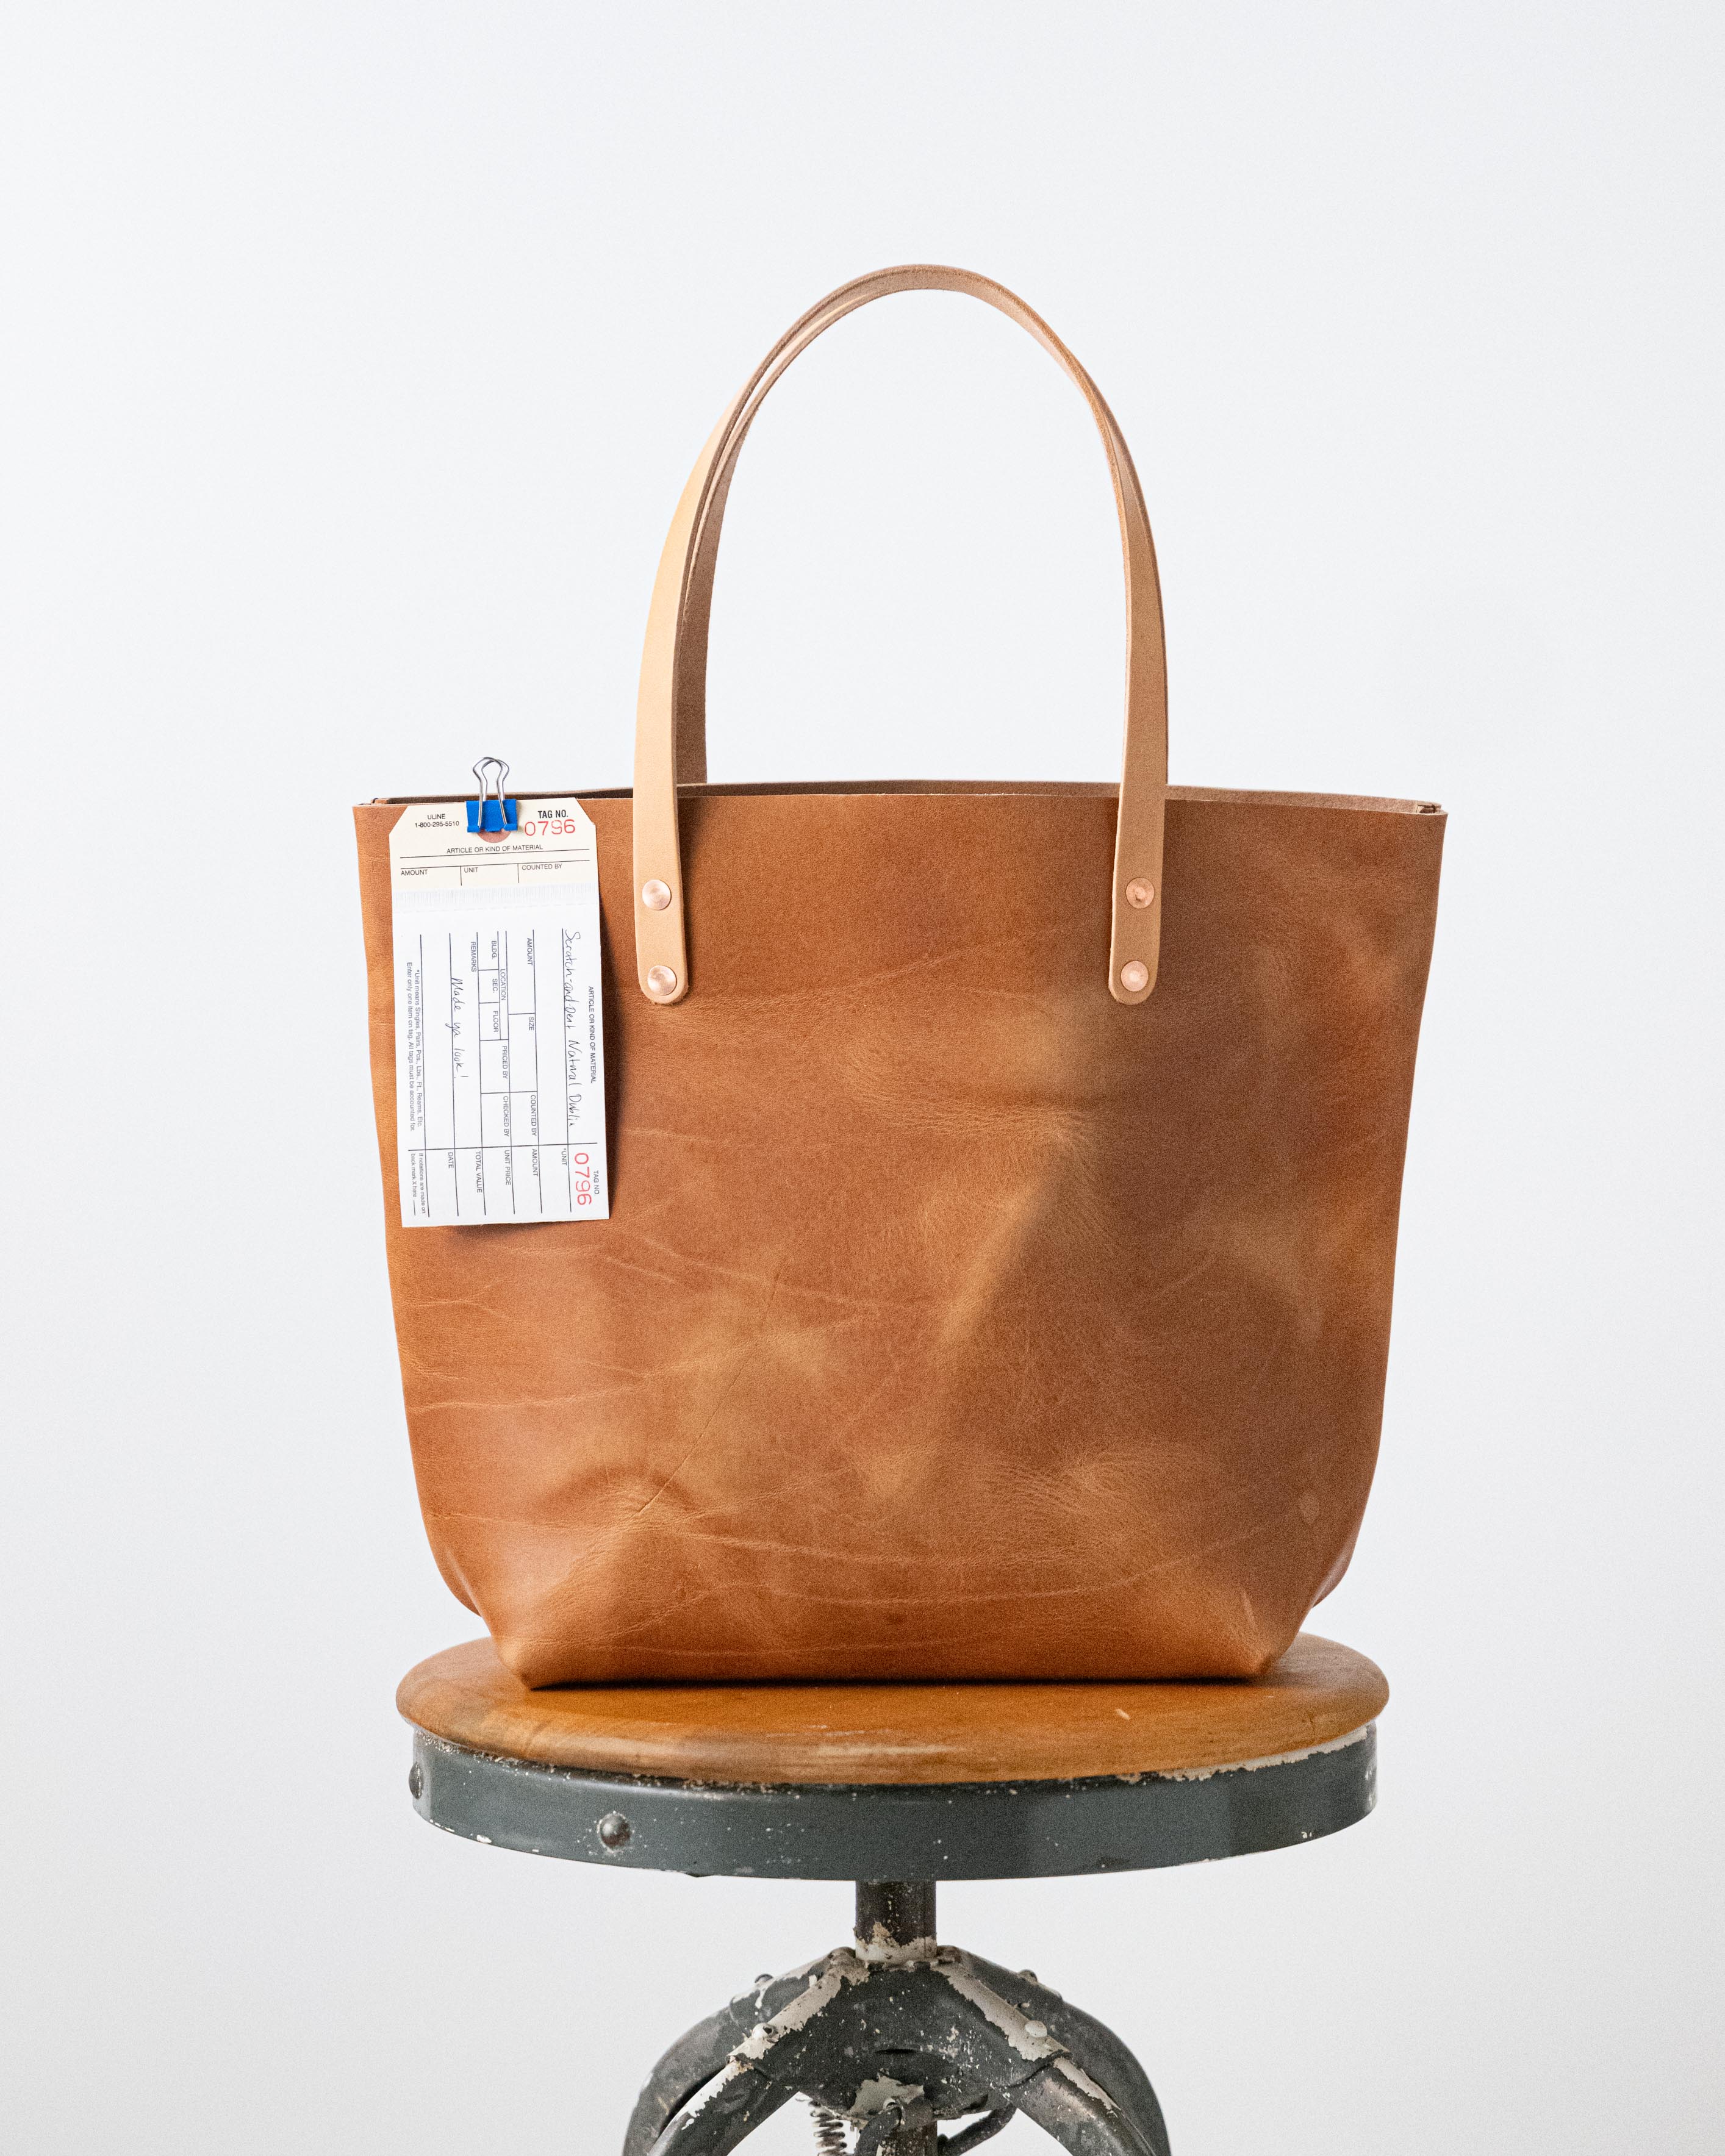 Scratch and Dent Natural Dublin Tote handmade leather tote bag leather bags tote handmade leather bags at KMM Co